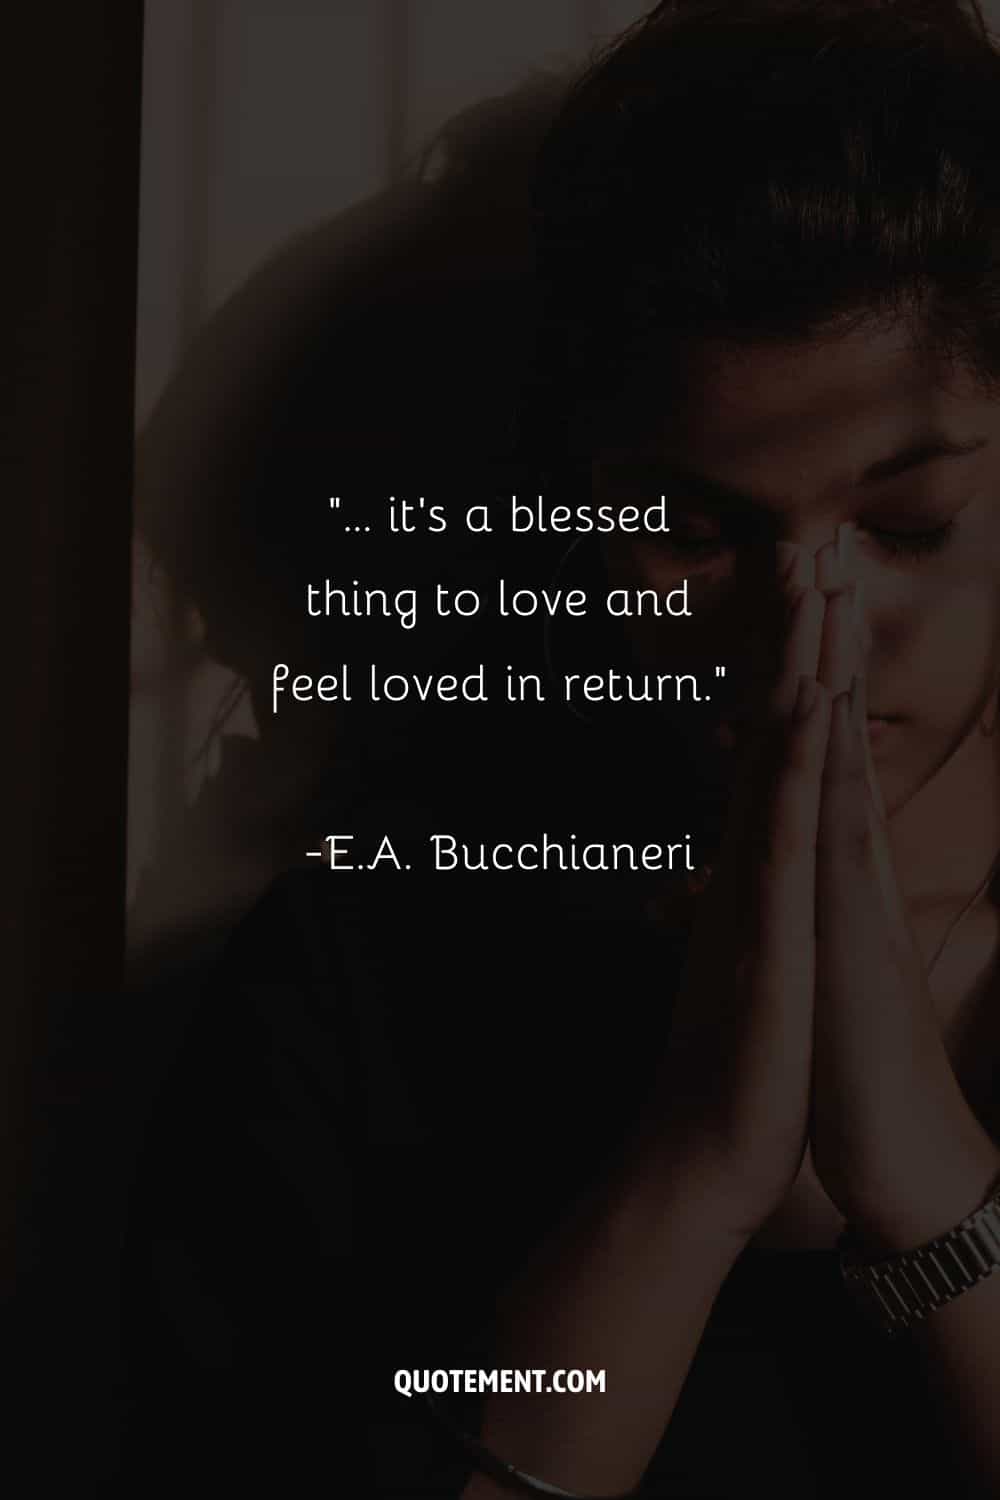 it’s a blessed thing to love and feel loved in return.